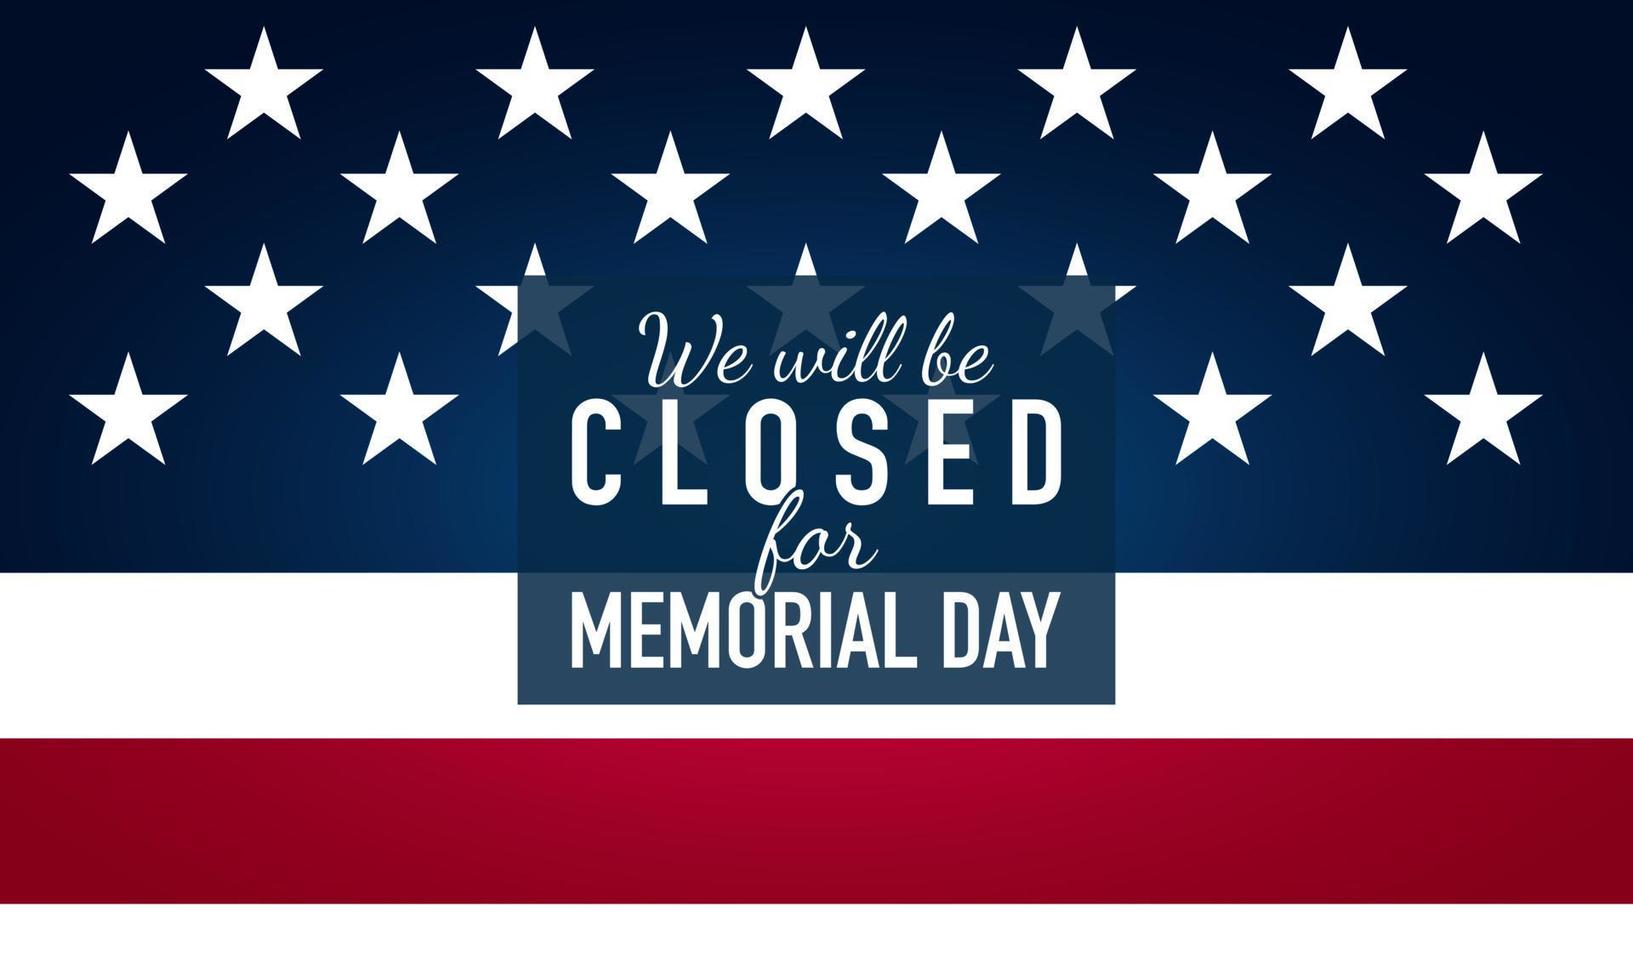 Memorial Day Background. We will be closed for Memorial Day. Banner Design. vector